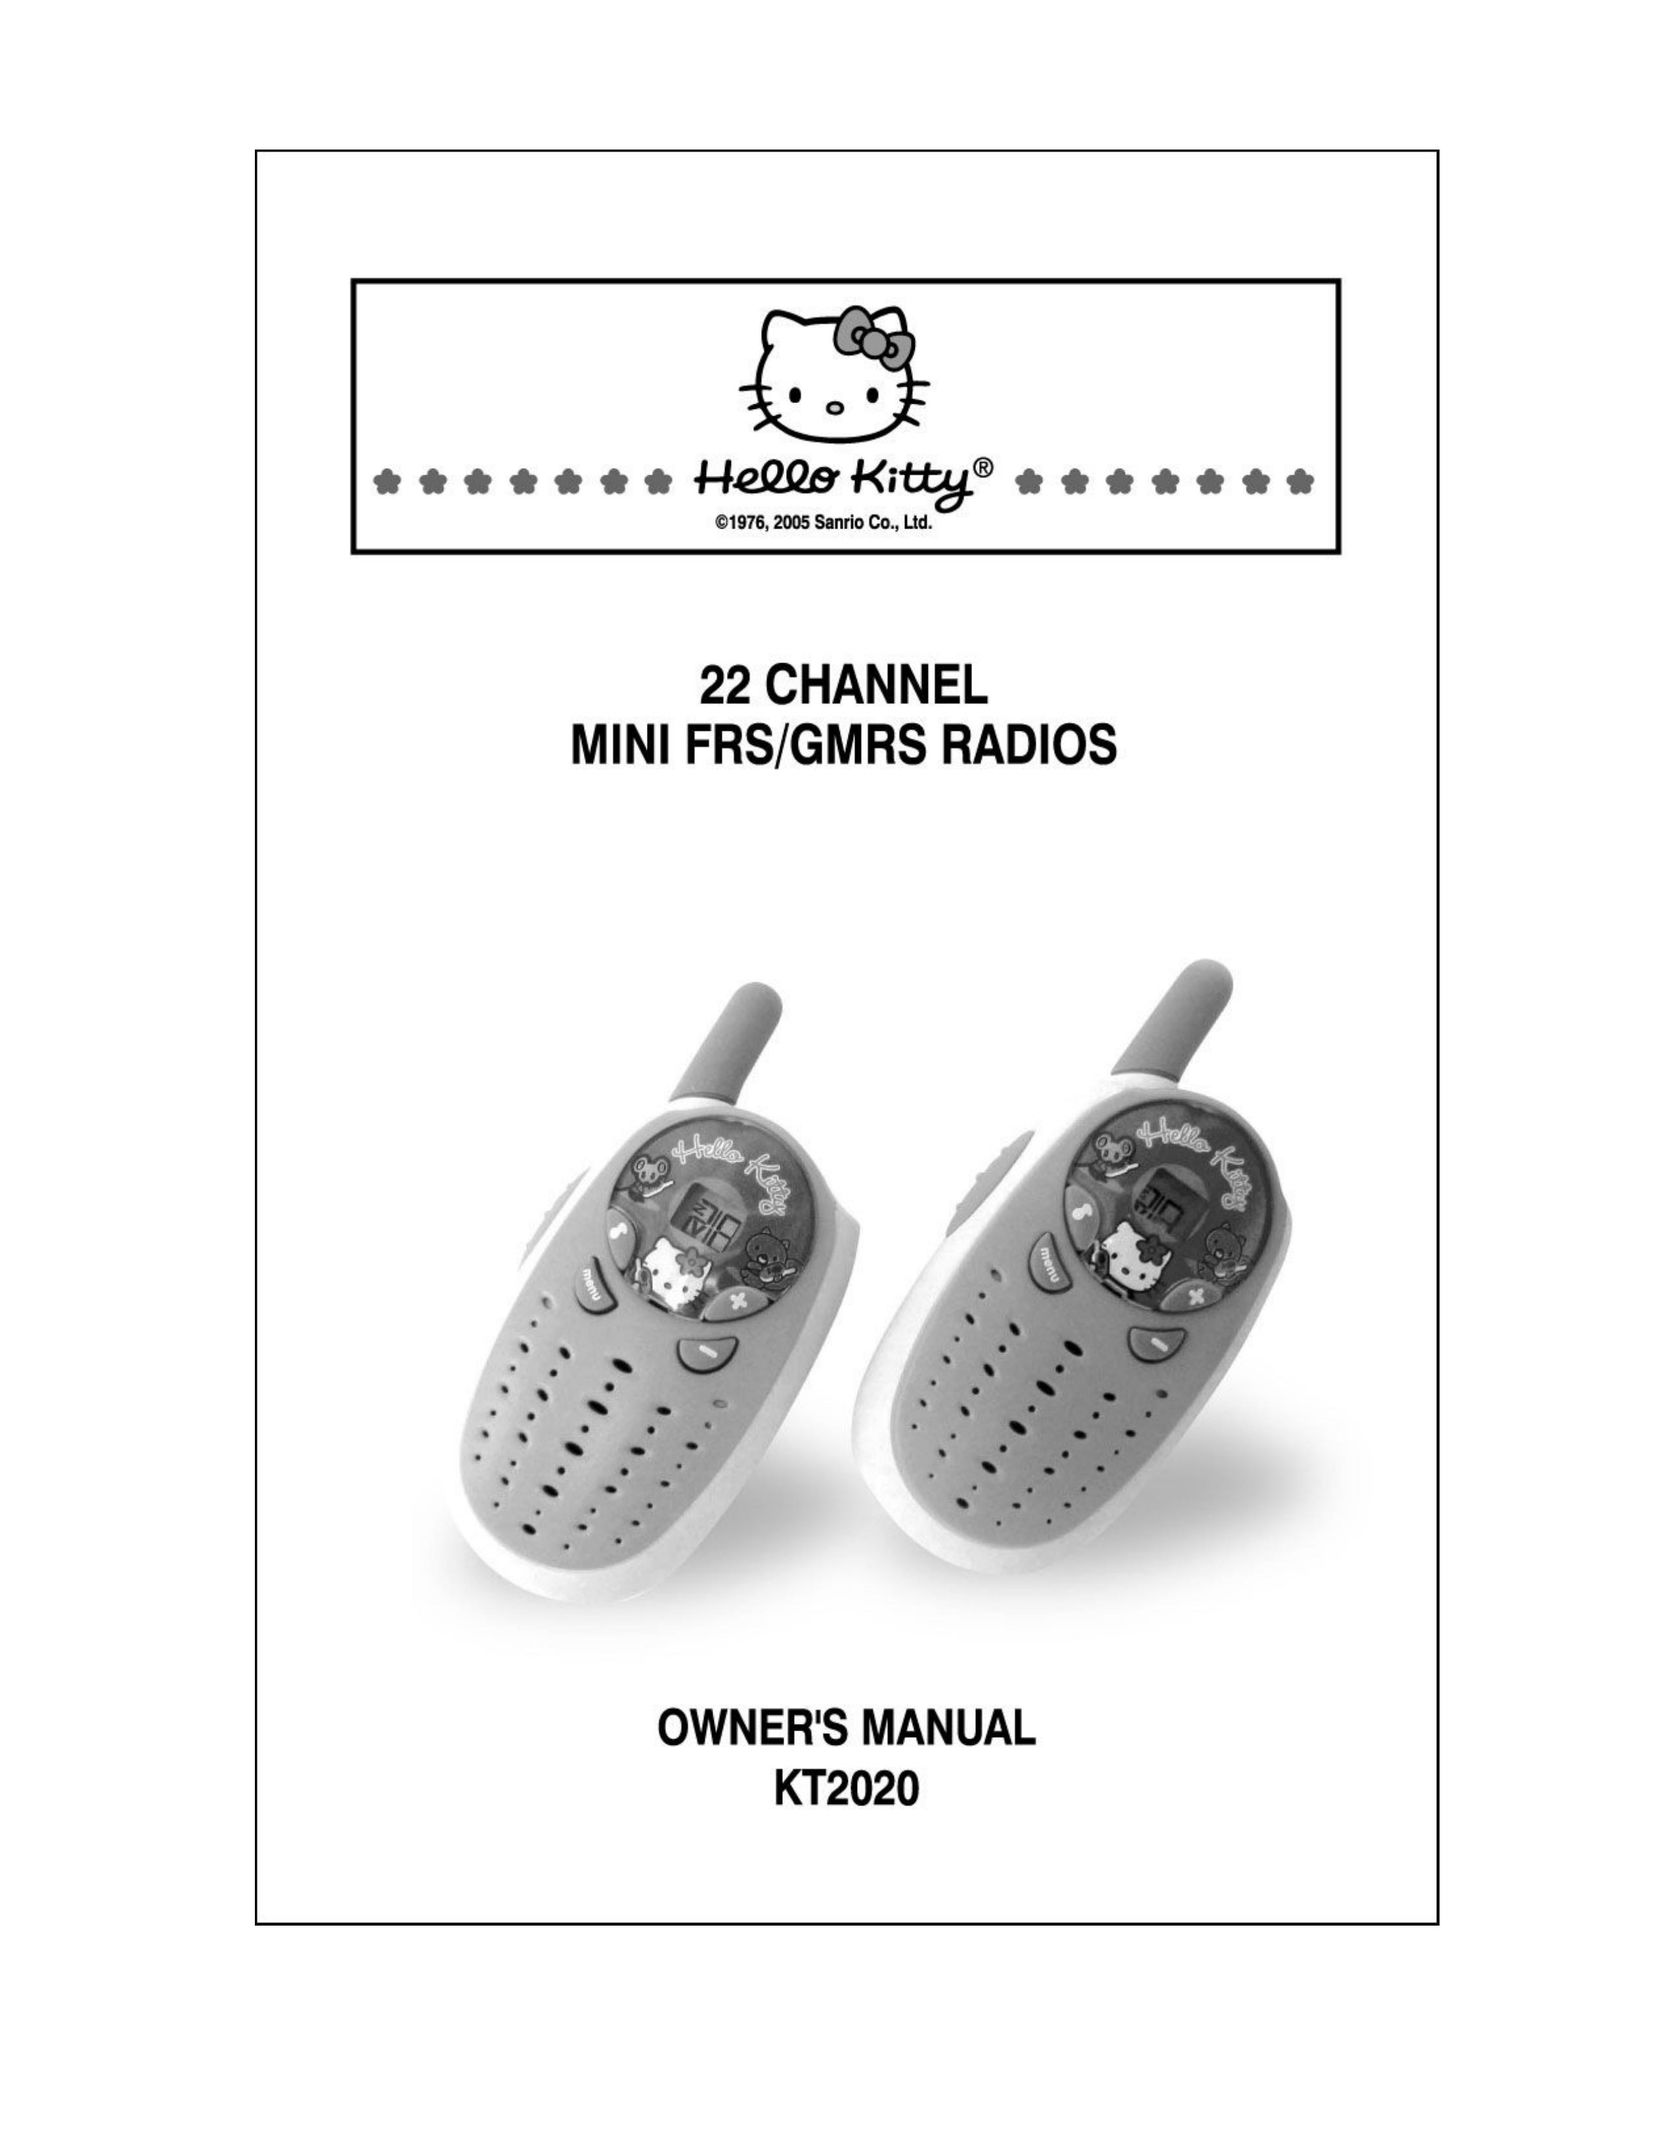 Spectra KT2020 Two-Way Radio User Manual